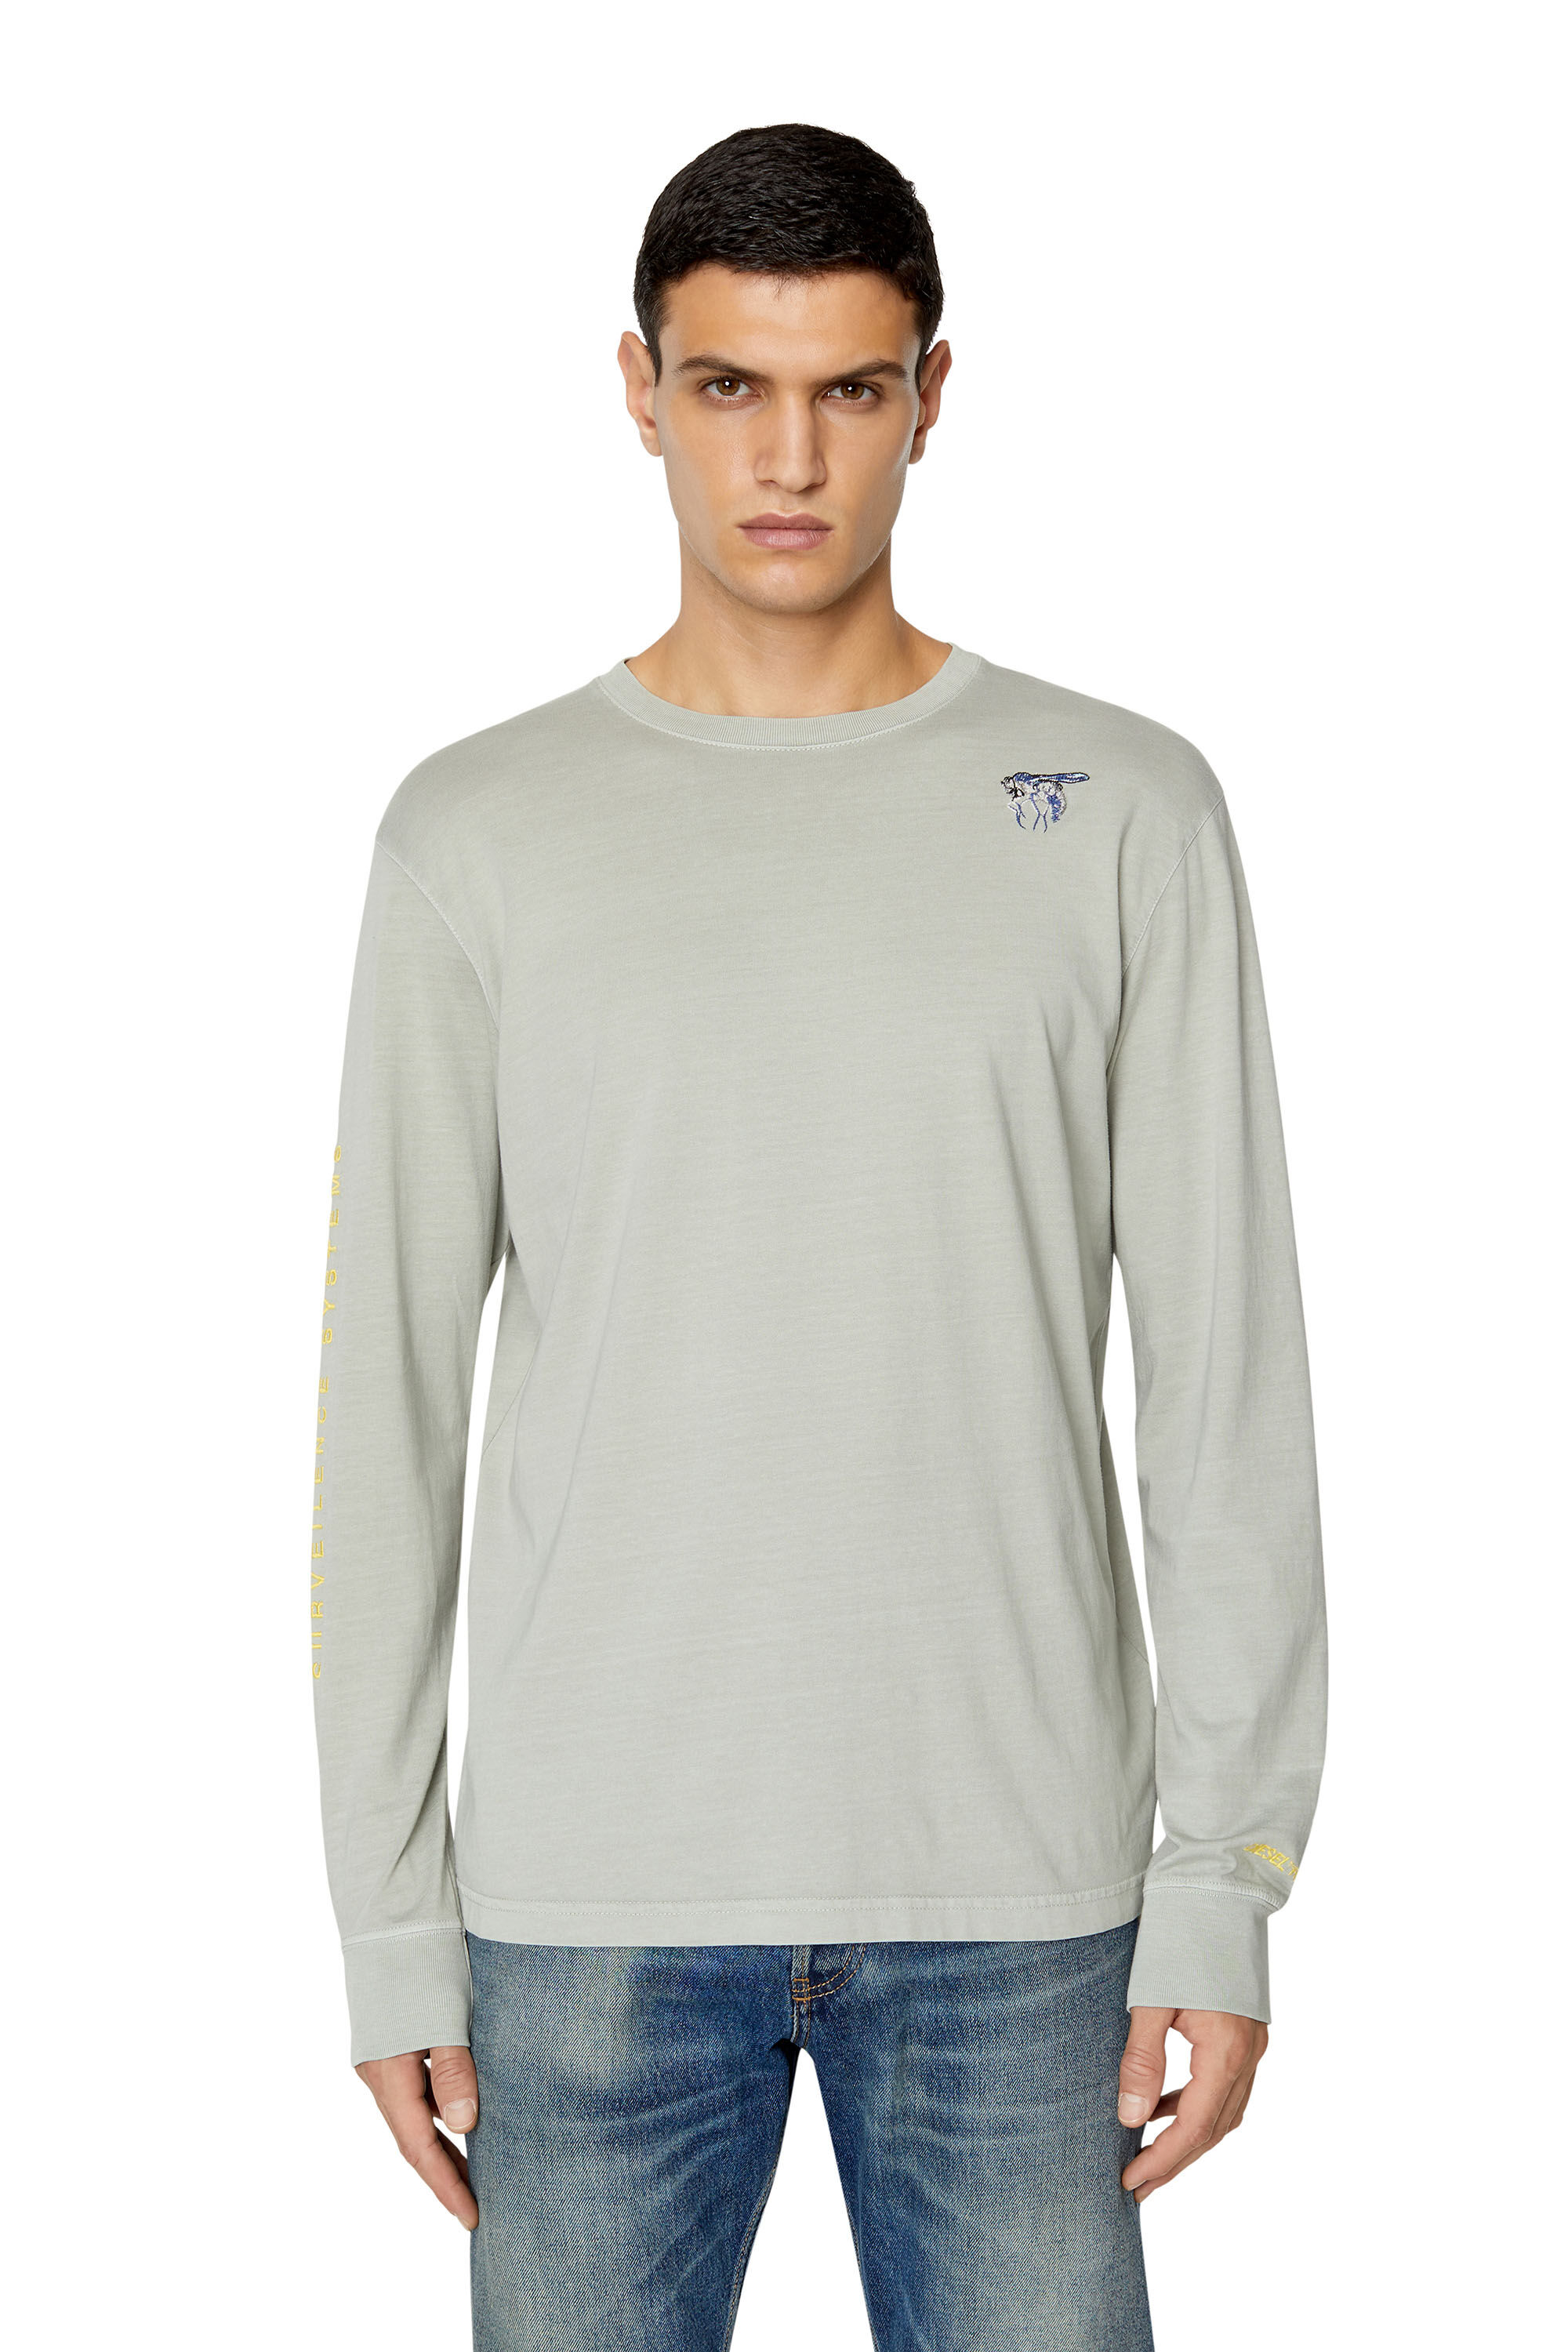 T-JUST-LS-E10 Man: Long-sleeve T-shirt with fly embroidery | Diesel